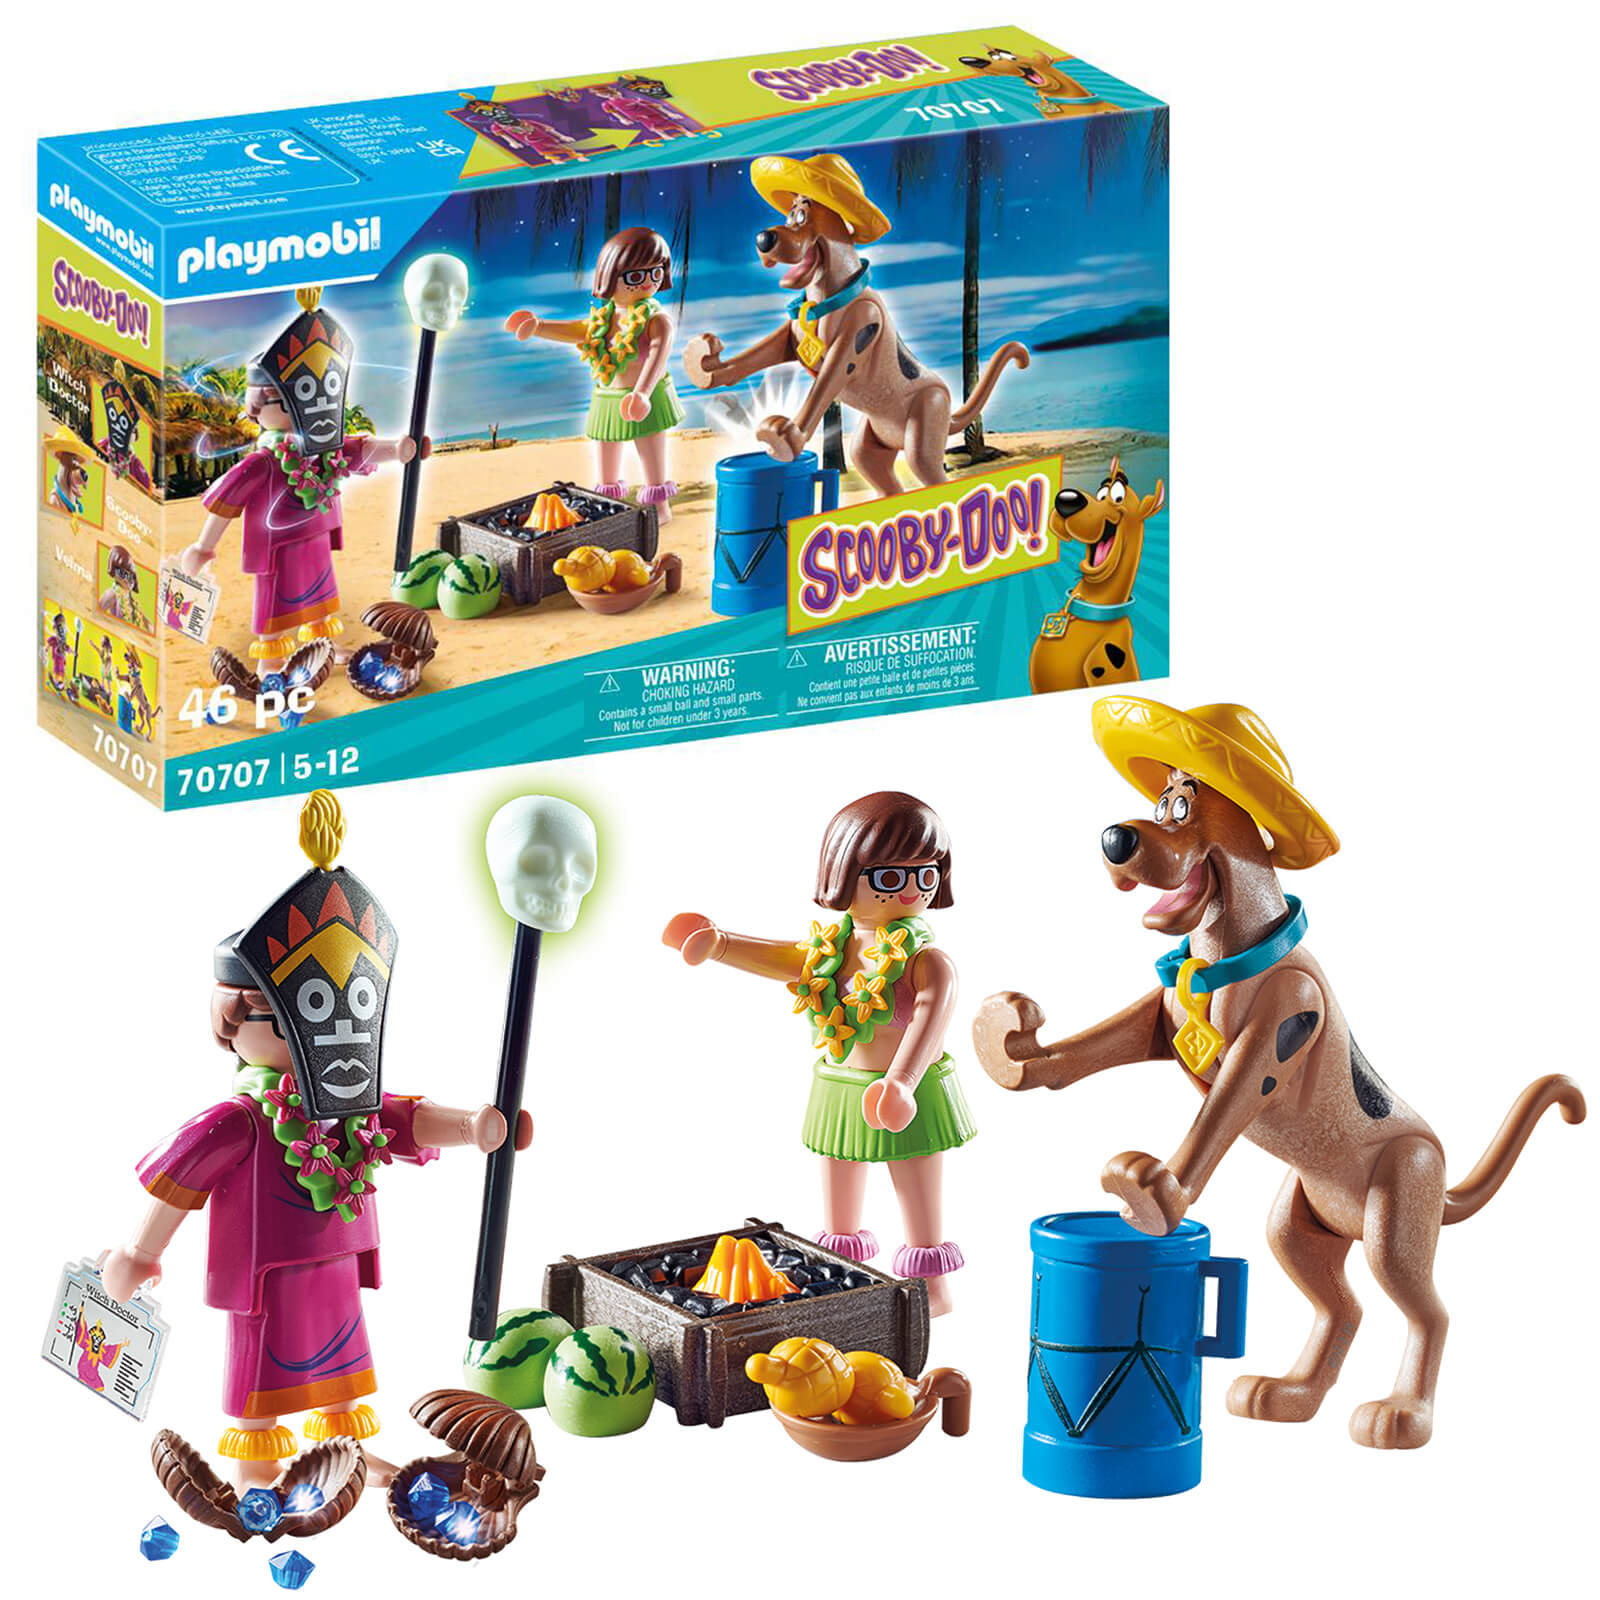 Playmobil SCOOBY-DOO! Adventure with Witch Doctor (70707)